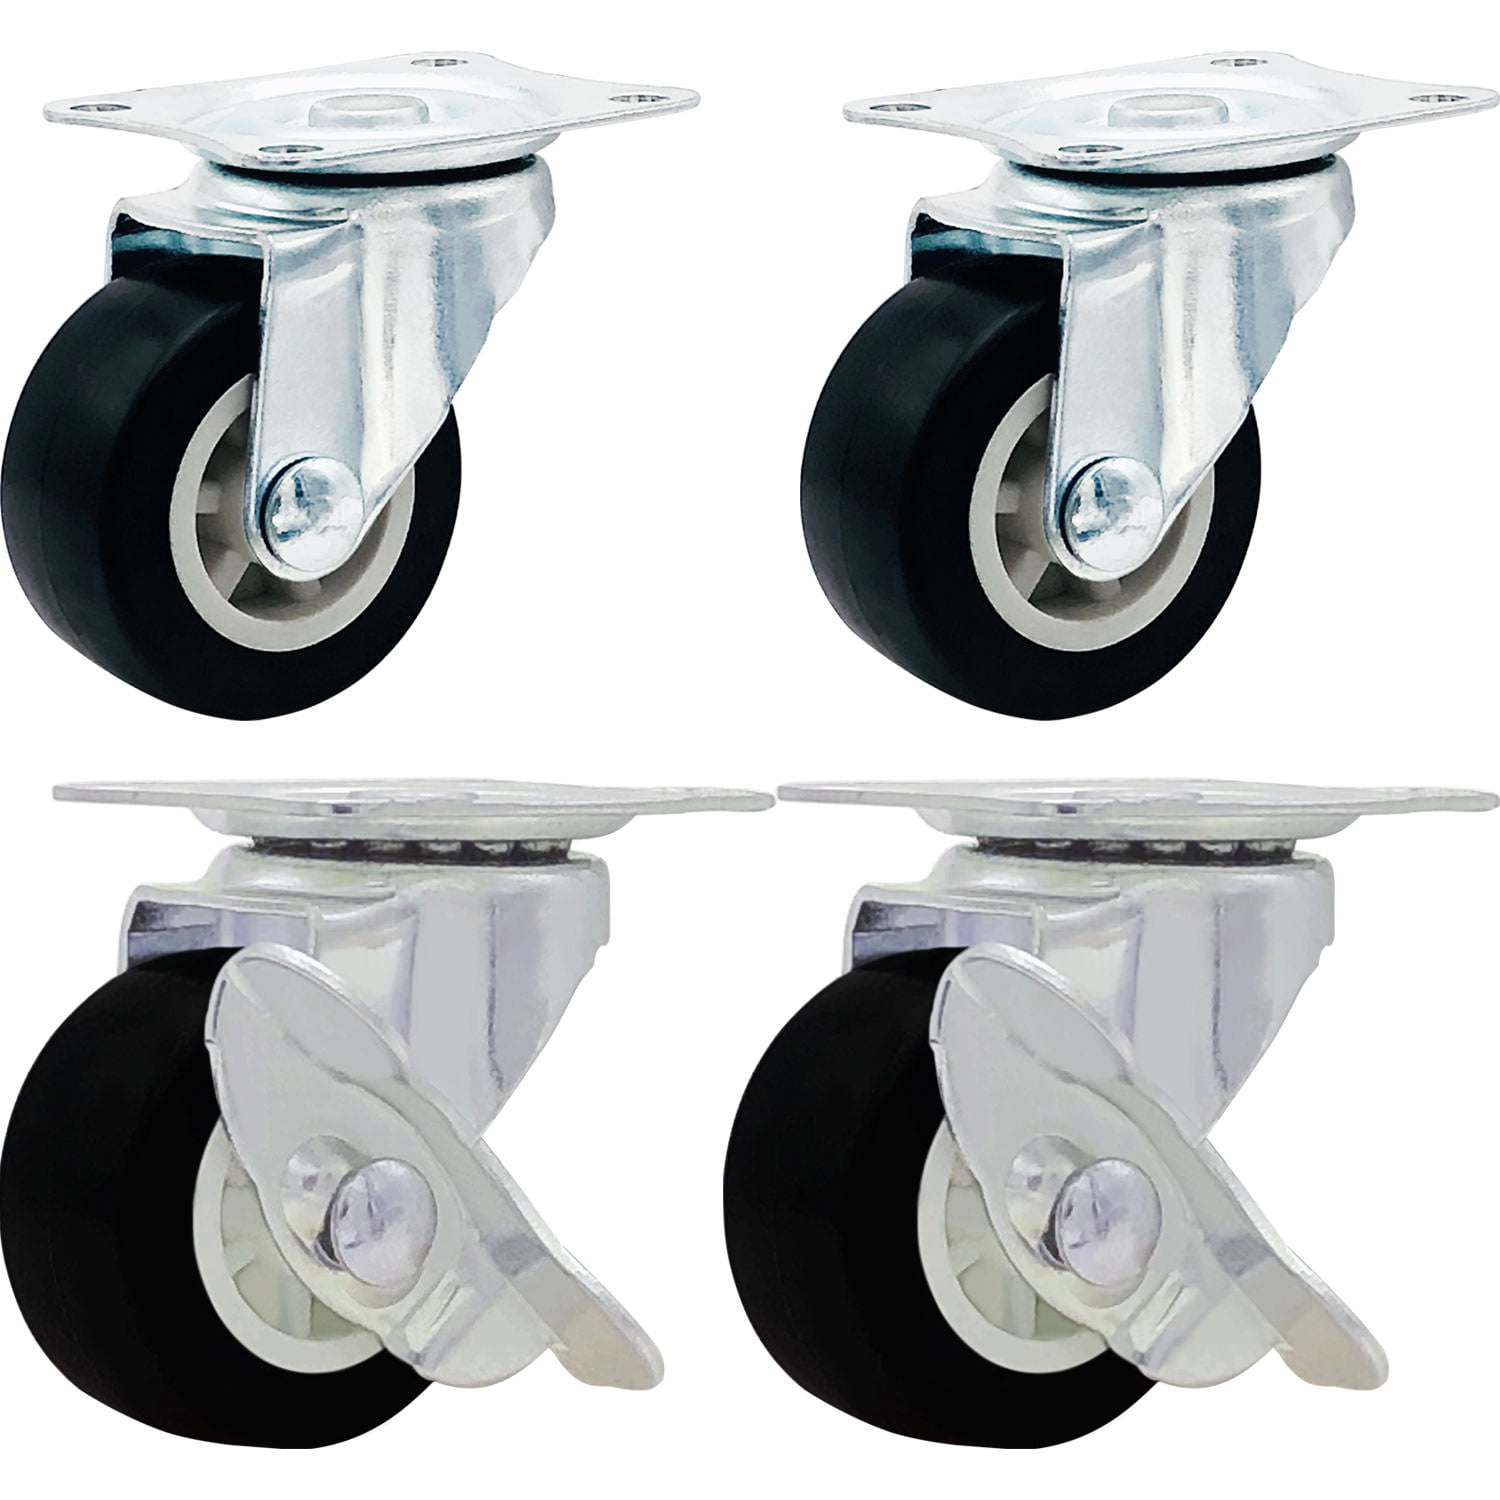 NEW C-GD20HRS C-GD20HRSB 4-PK SWIVEL PLATE DH CASTERS 2" HARD RUBBER WHEELS 